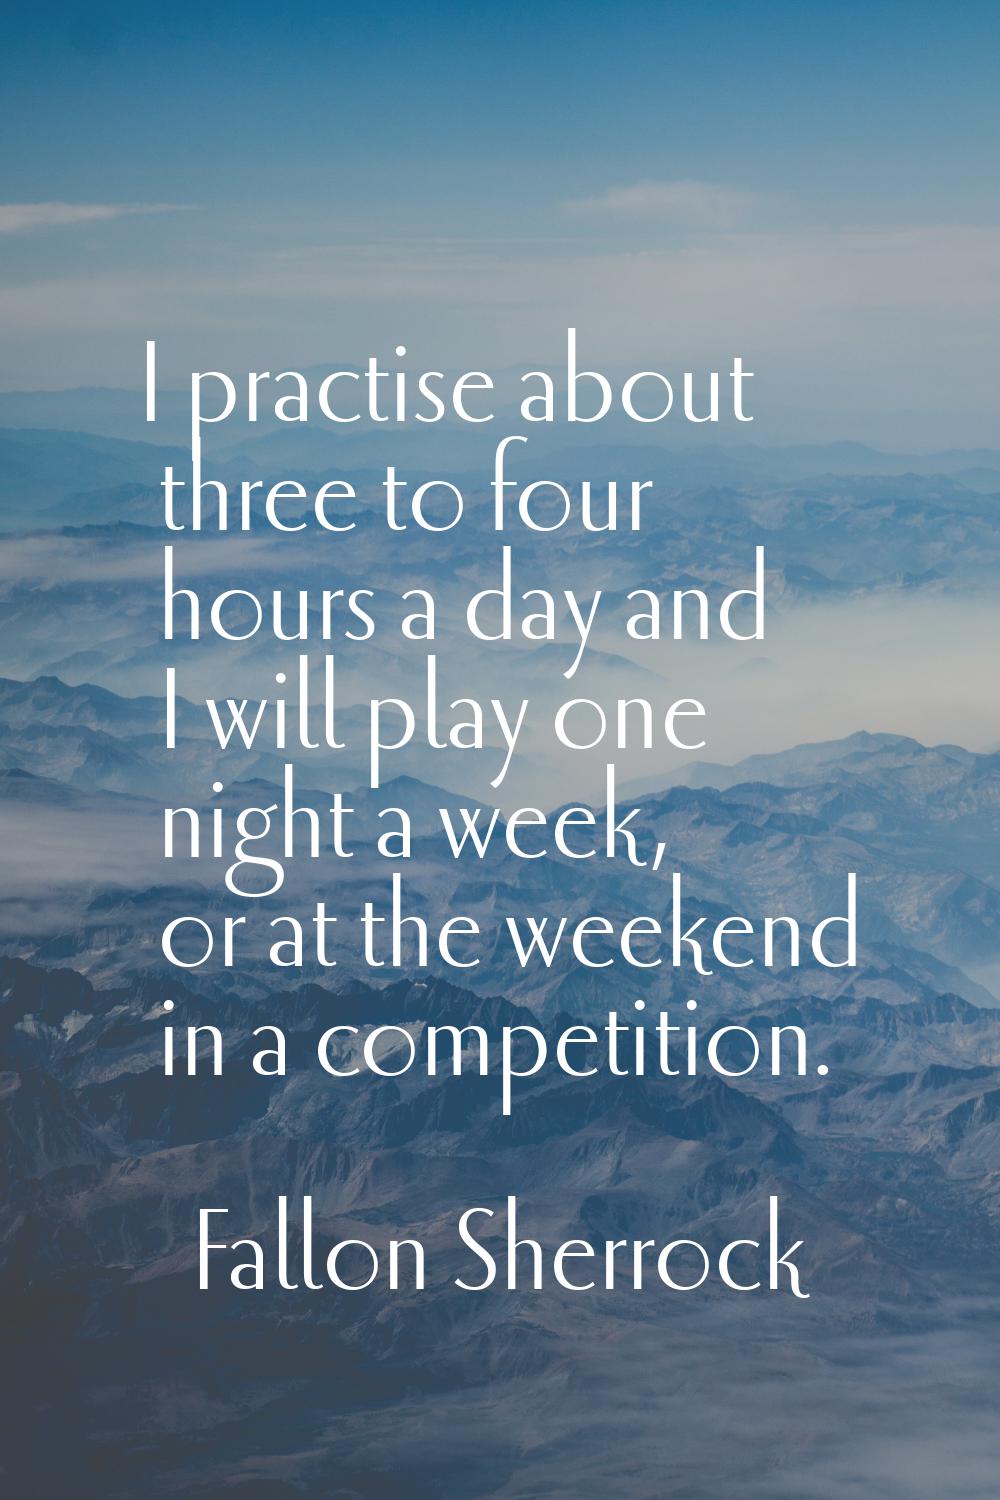 I practise about three to four hours a day and I will play one night a week, or at the weekend in a